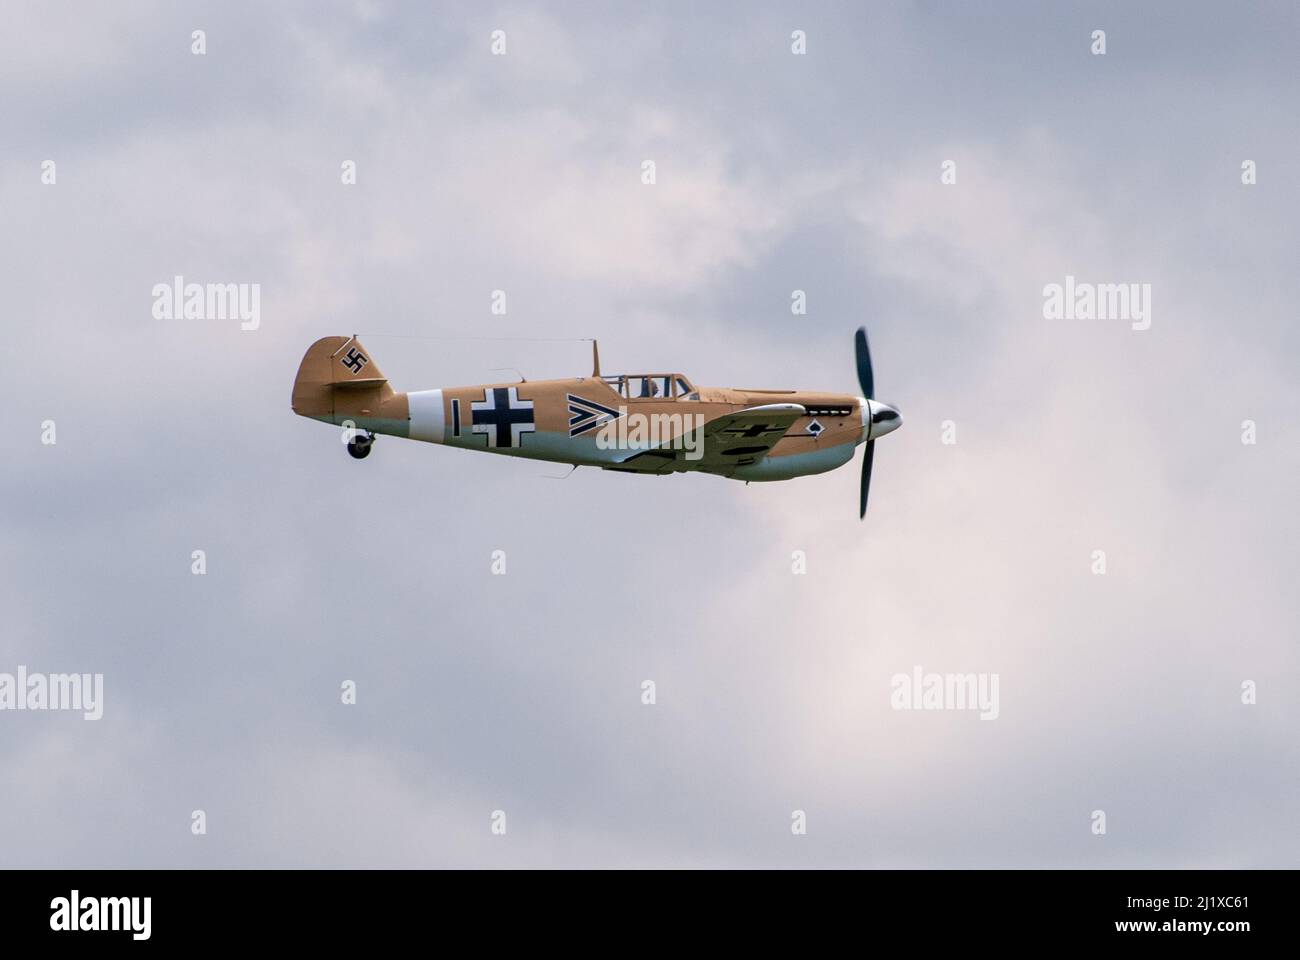 DUXFORD, CAMBRIDGESHIRE, UK - JULY 13, 2014: WW2 Bf (Messerschmitt) 109 carries out a dogfight display at Duxford airfield during Flying Legends Stock Photo